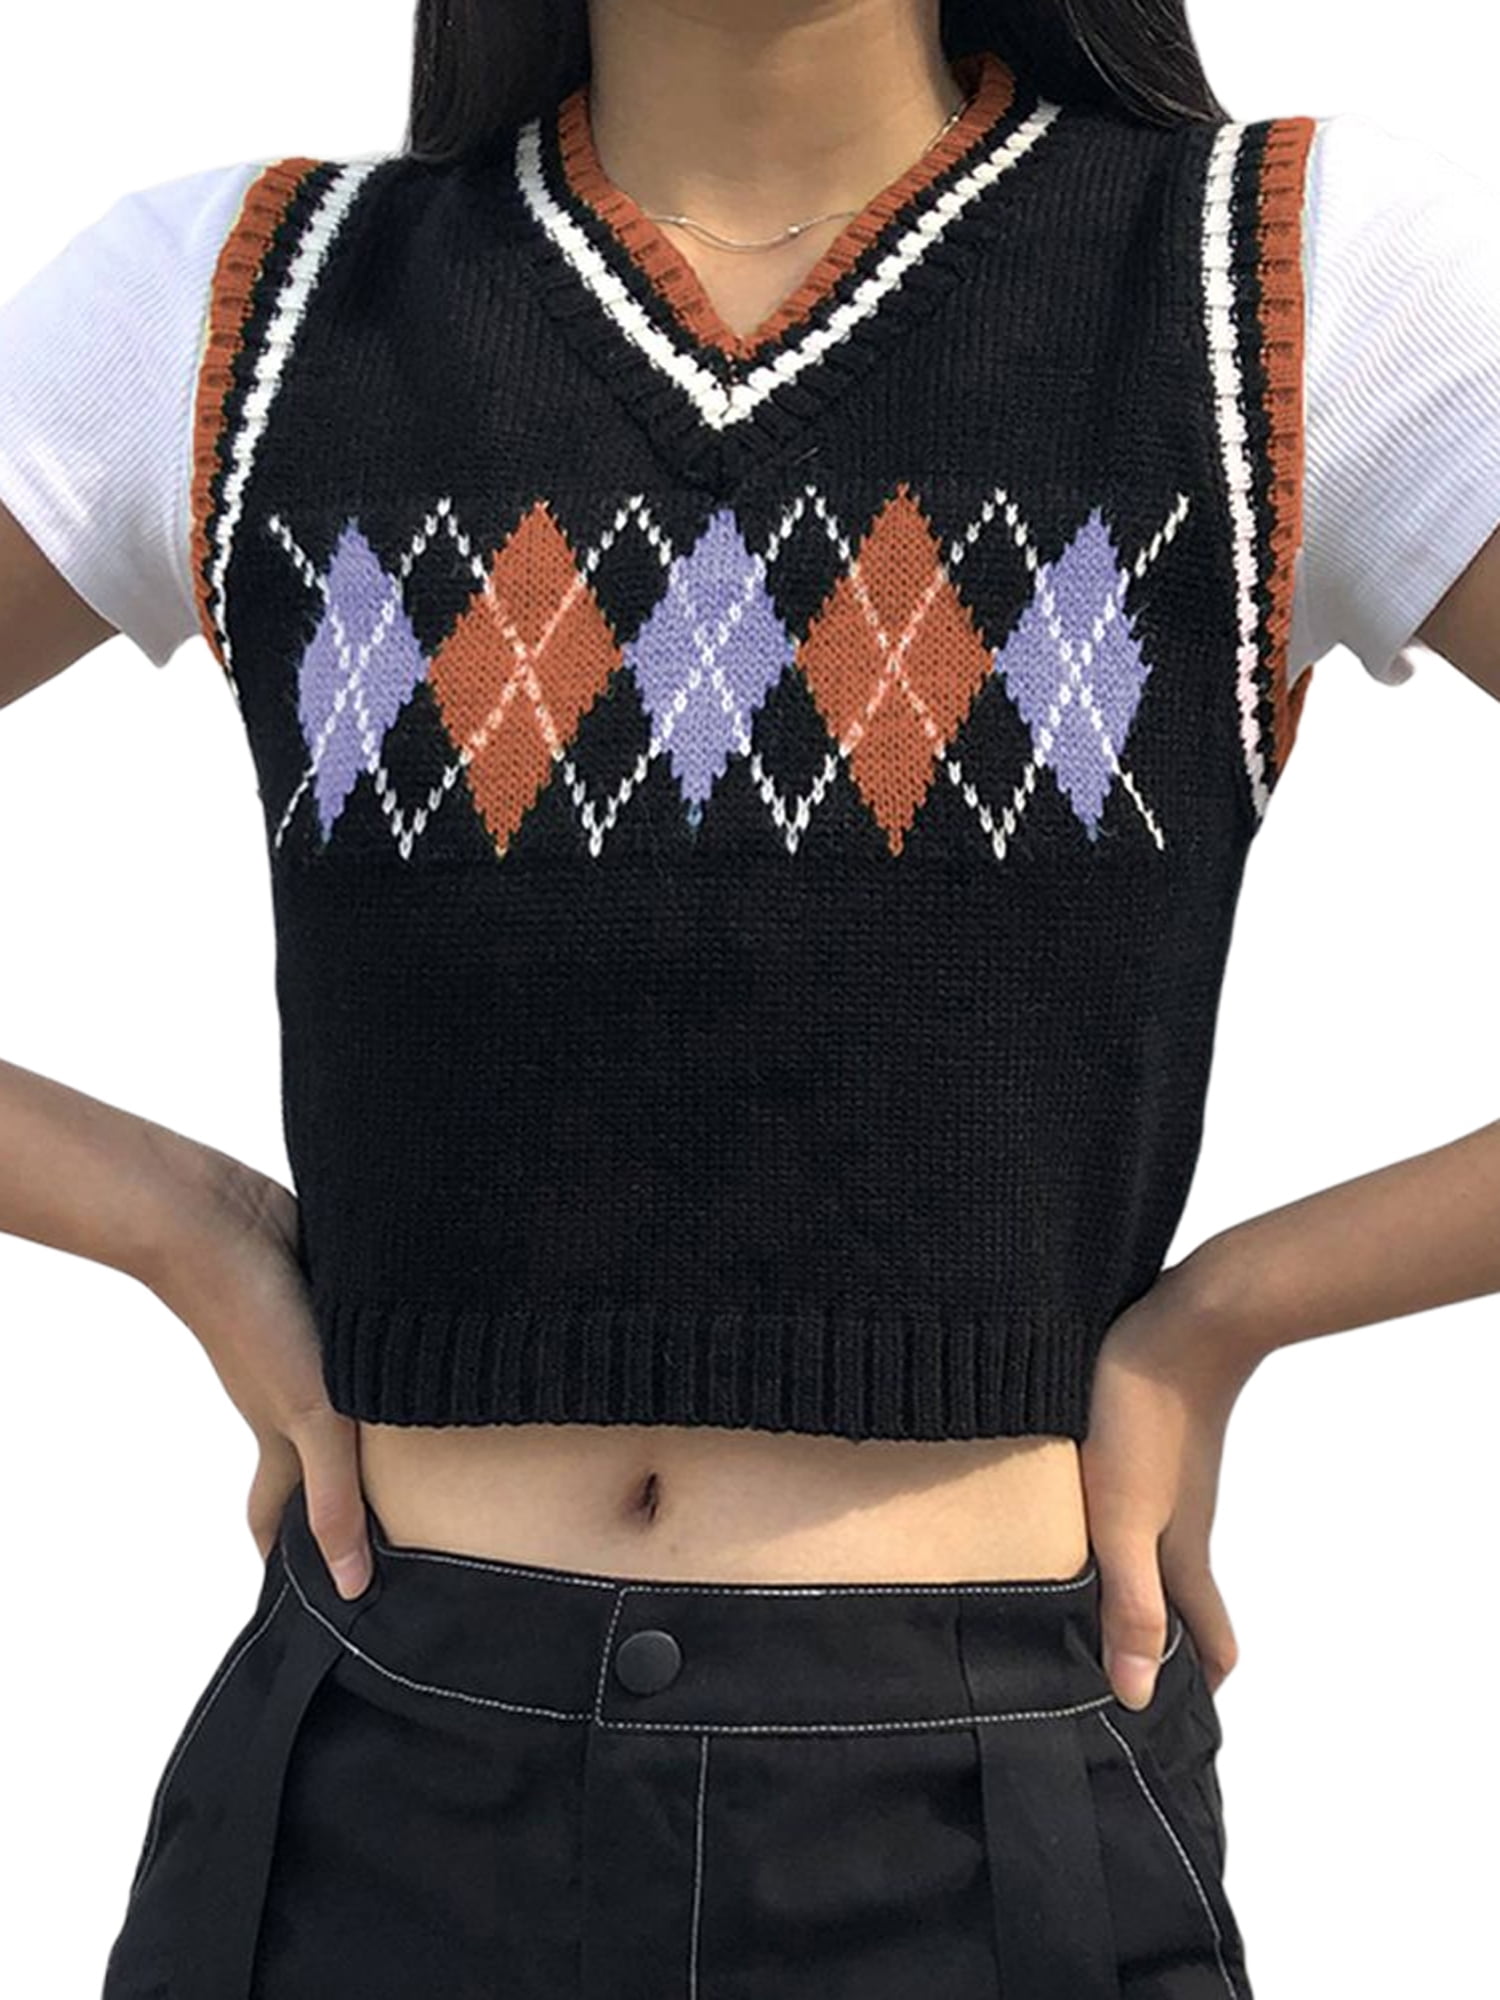 Gihuo Womens Teenage Preppy V Neck Sleeveless Y2K Argyle Plaid Crop Sweater Vests Tops